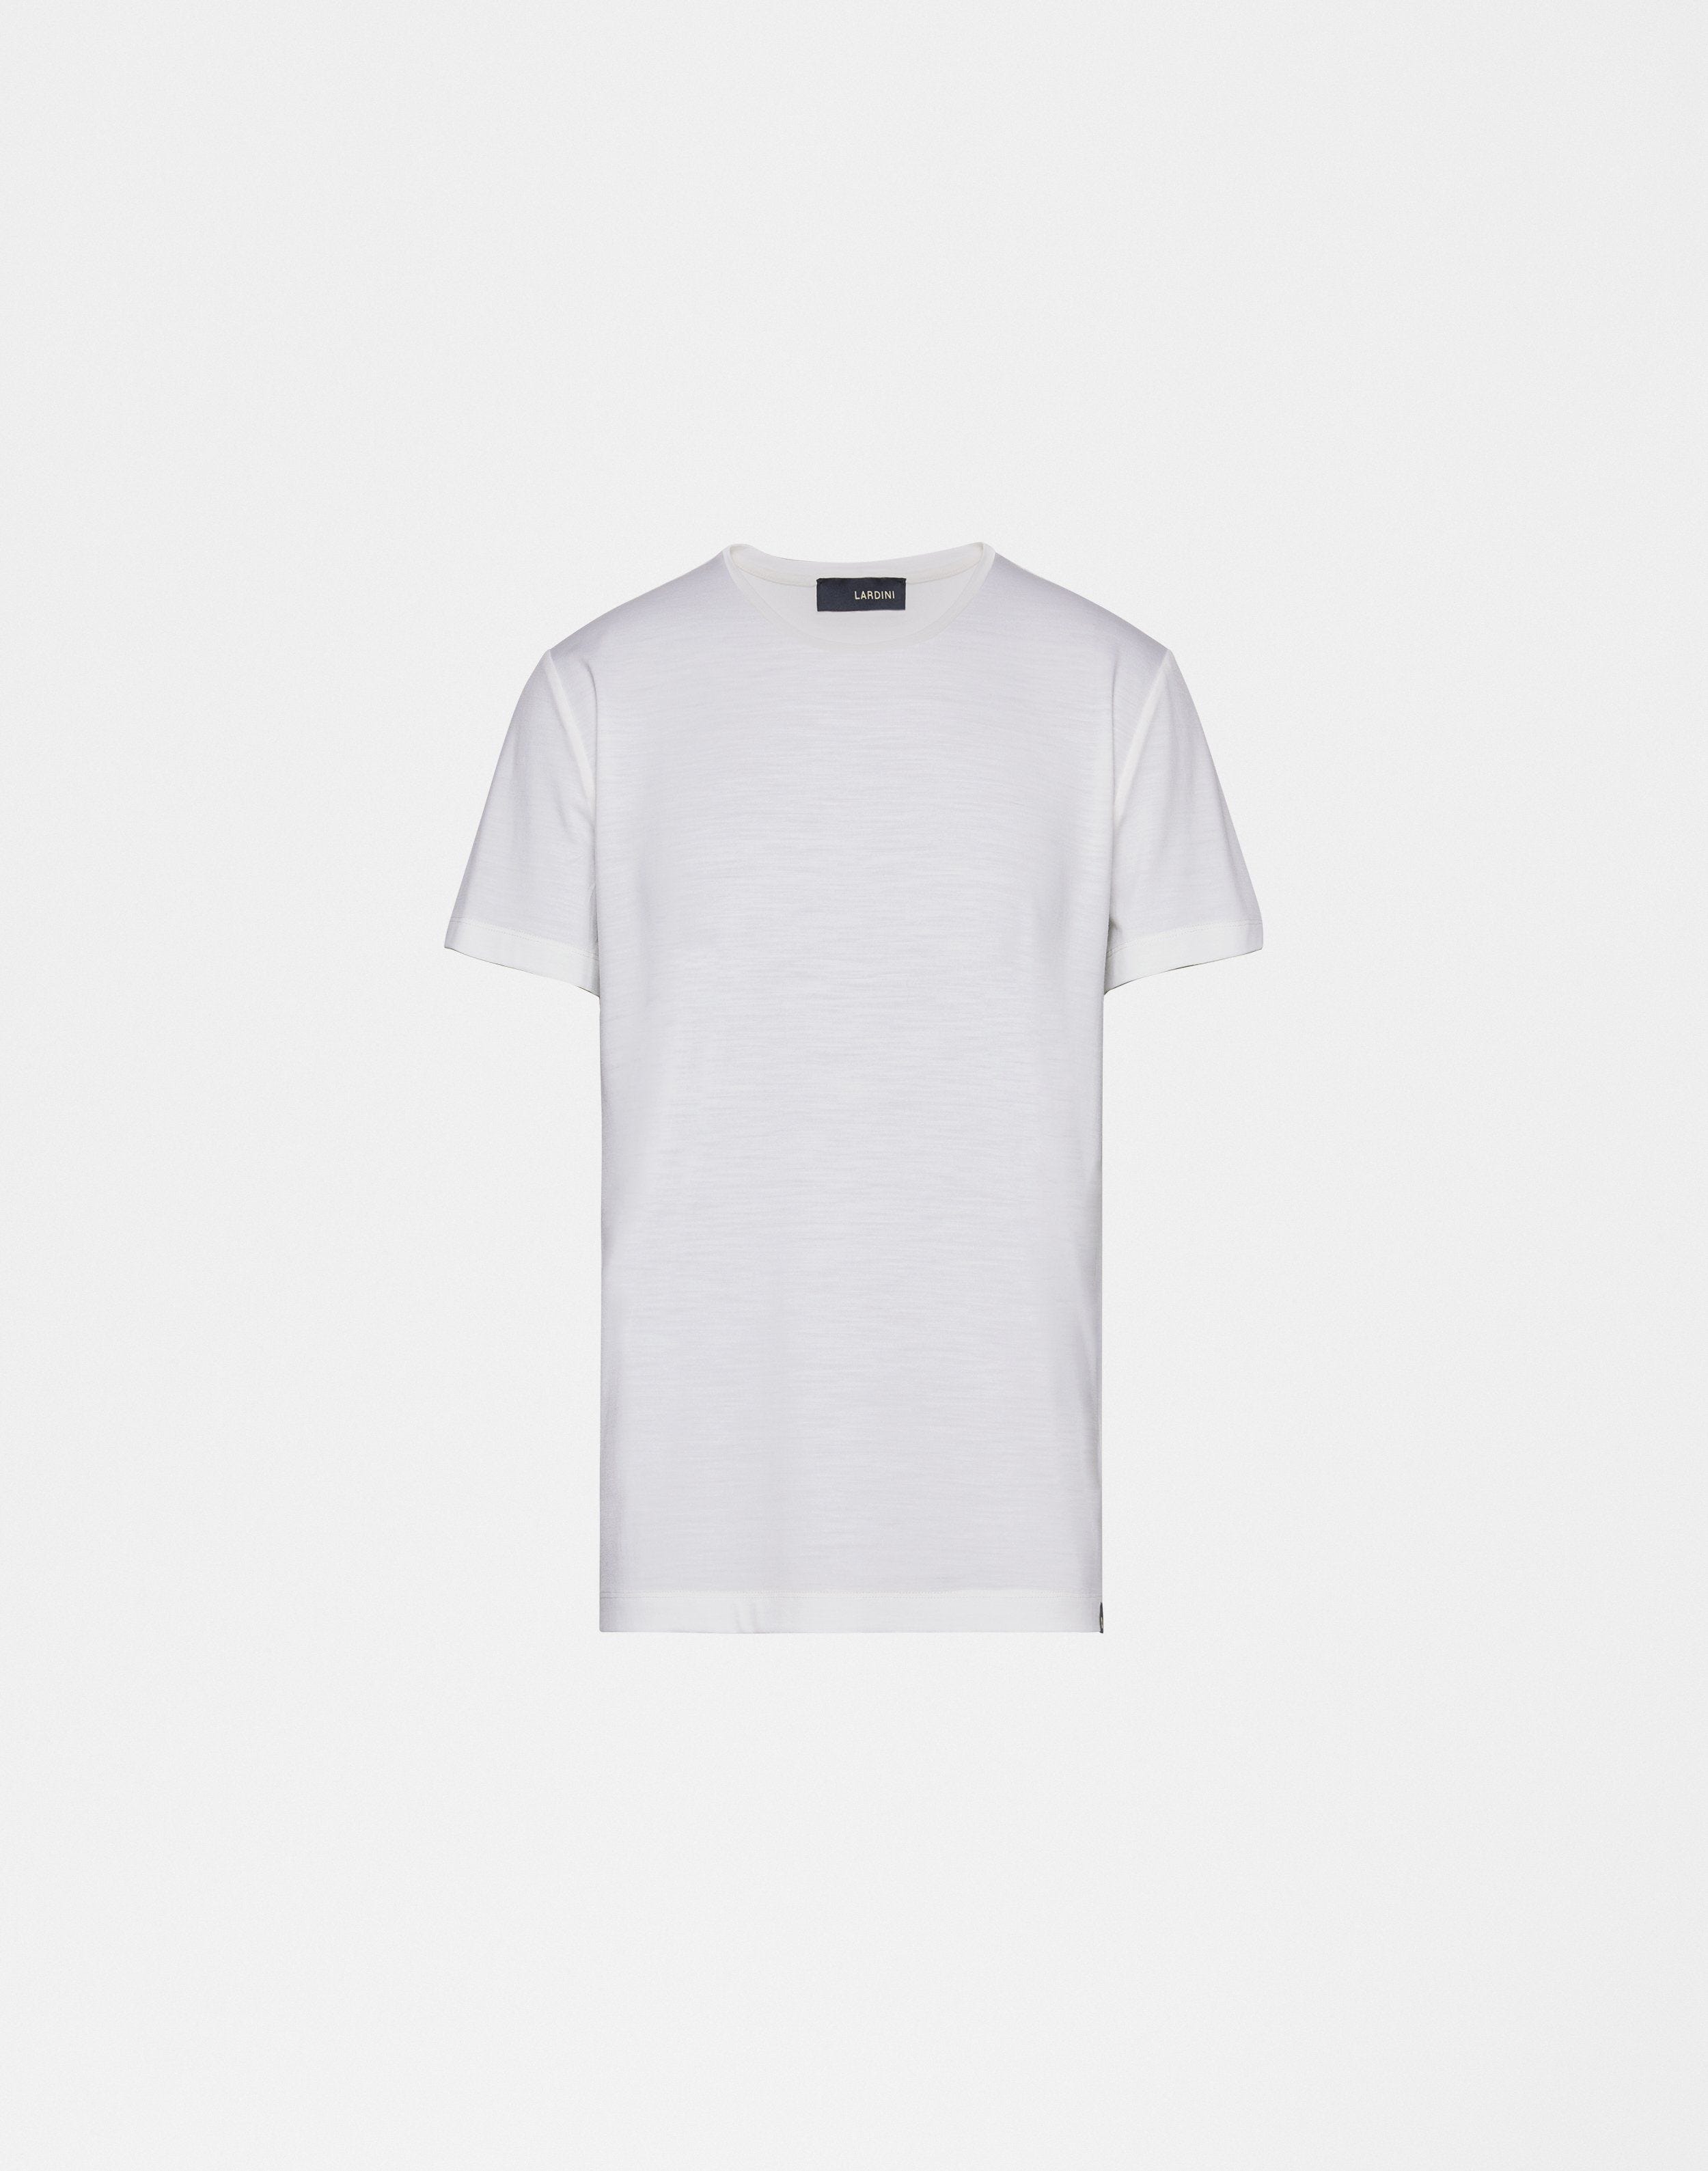 louis vuitton white short sleeve t shirt with pocket